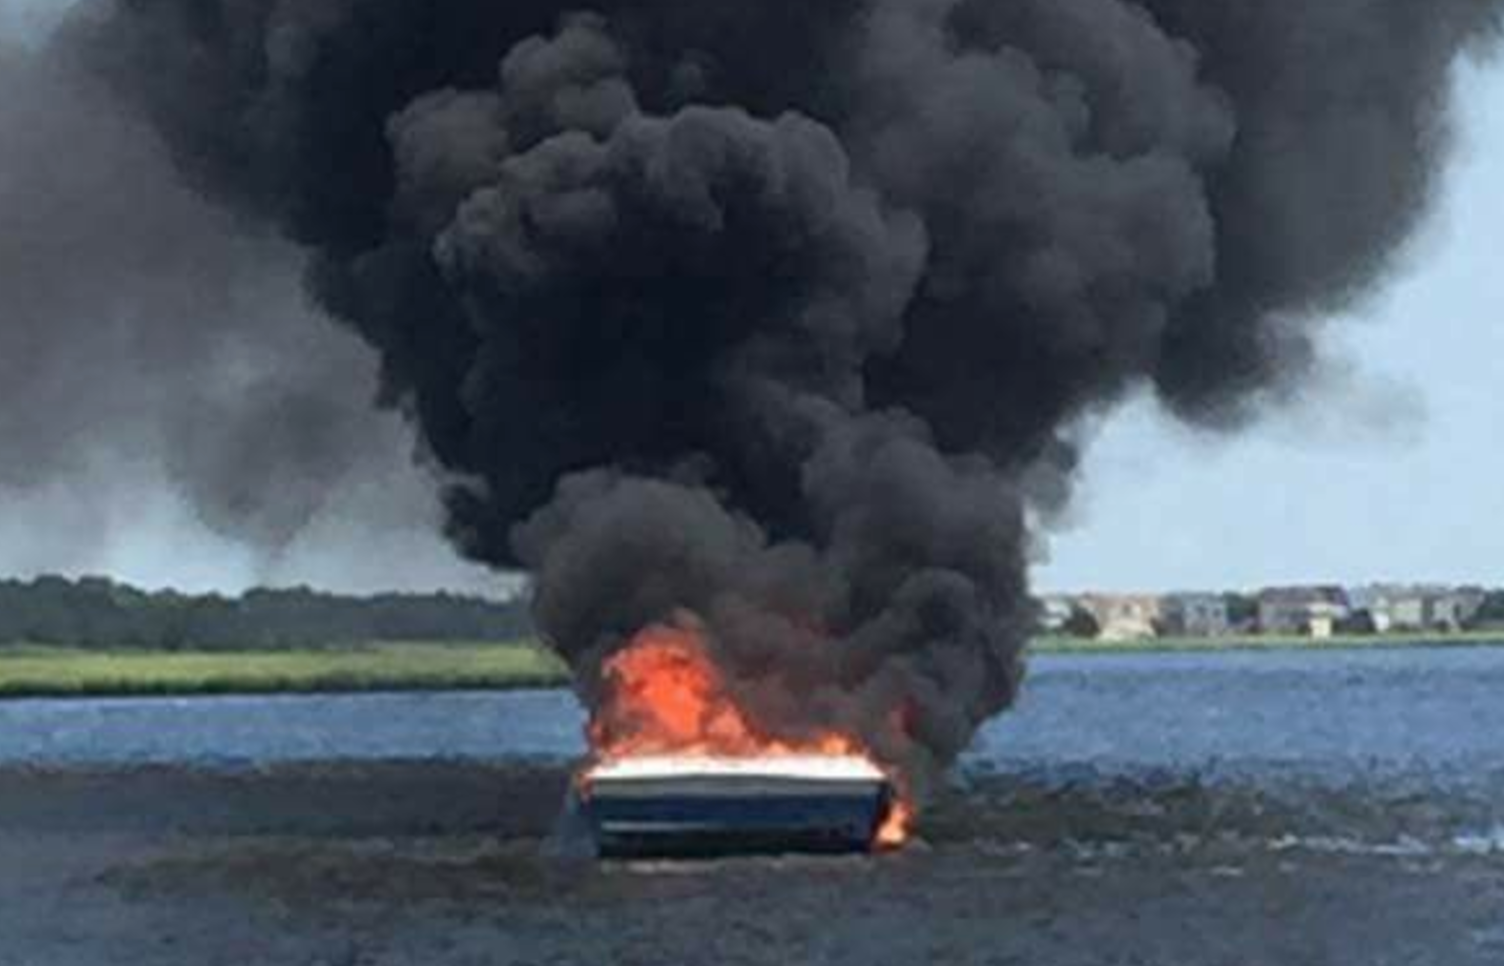  A boat fully engulfed in flames near Mystic Island Monday afternoon. (Image: Dennis C. Seeley Jr. via Mystic Island Volunteer Fire Company on Facebook) 